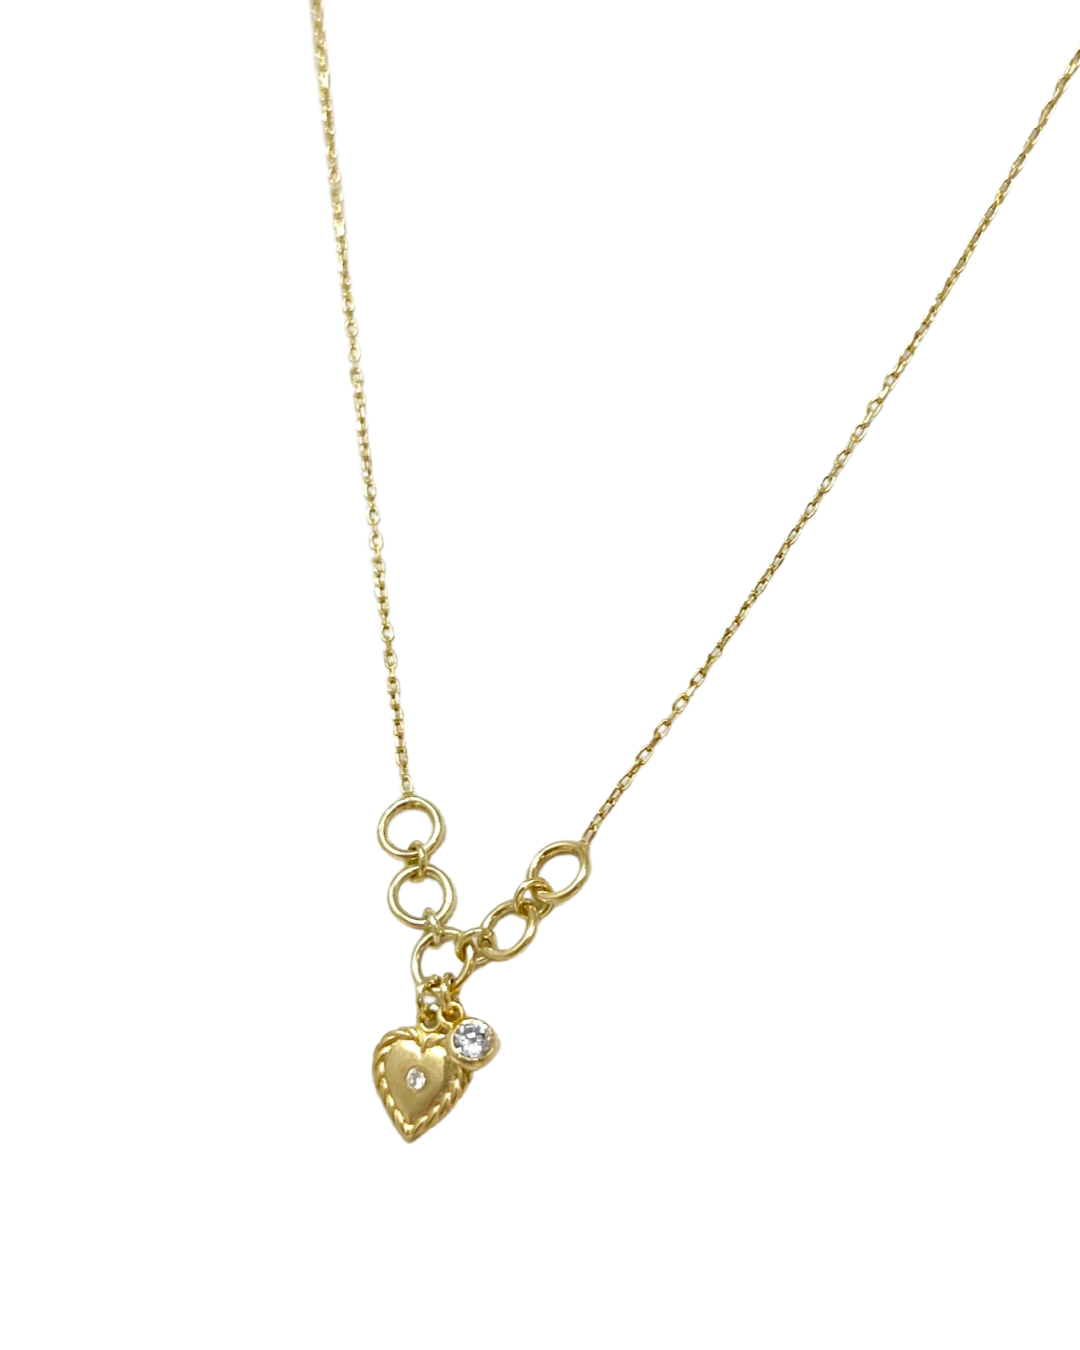 Cutie Necklace in Gold